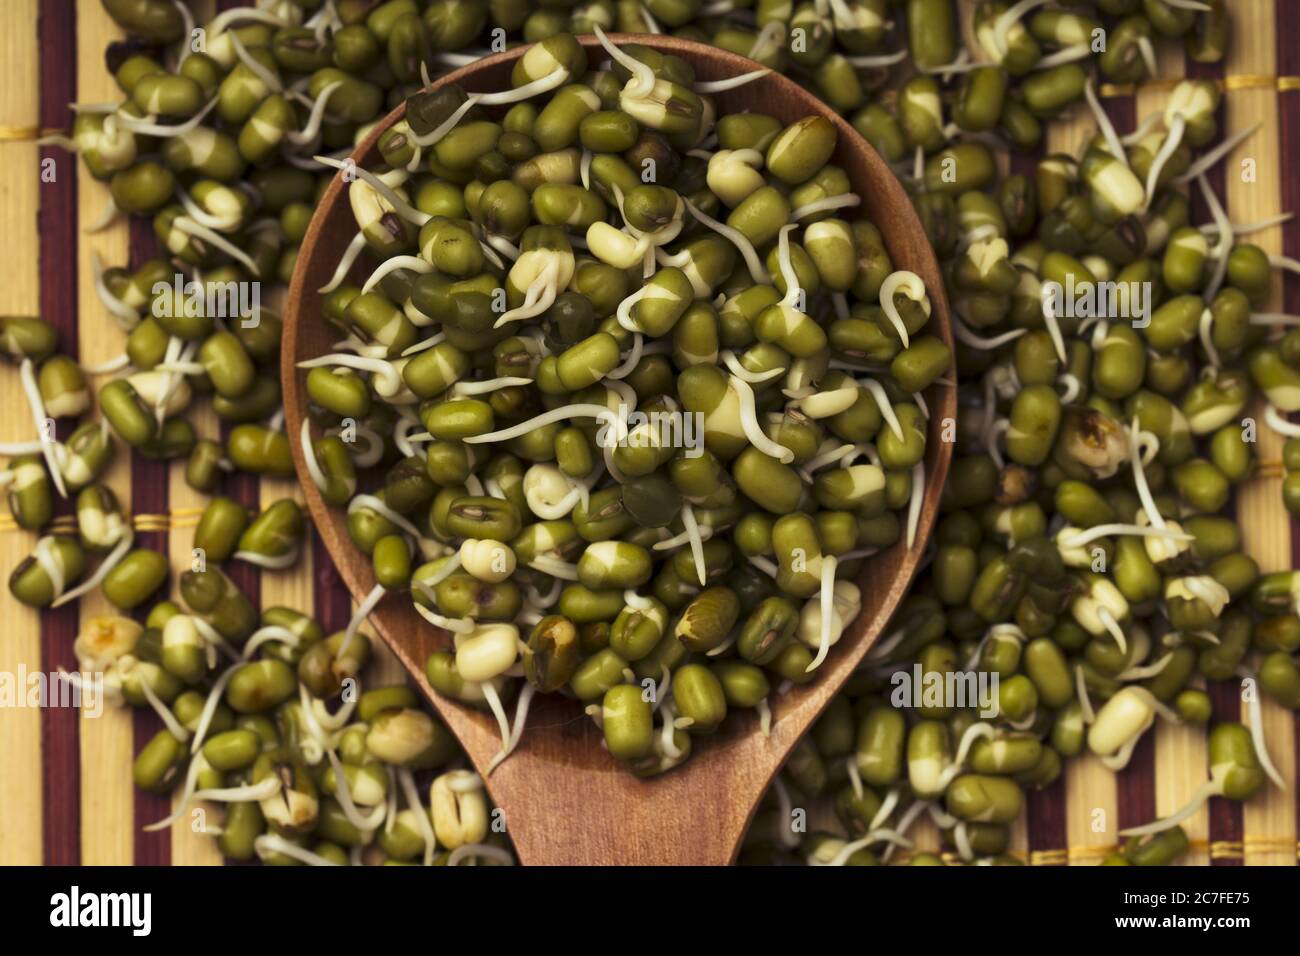 Sprouted Mung Beans. Fresh sprouts of bean seeds. Stock Photo